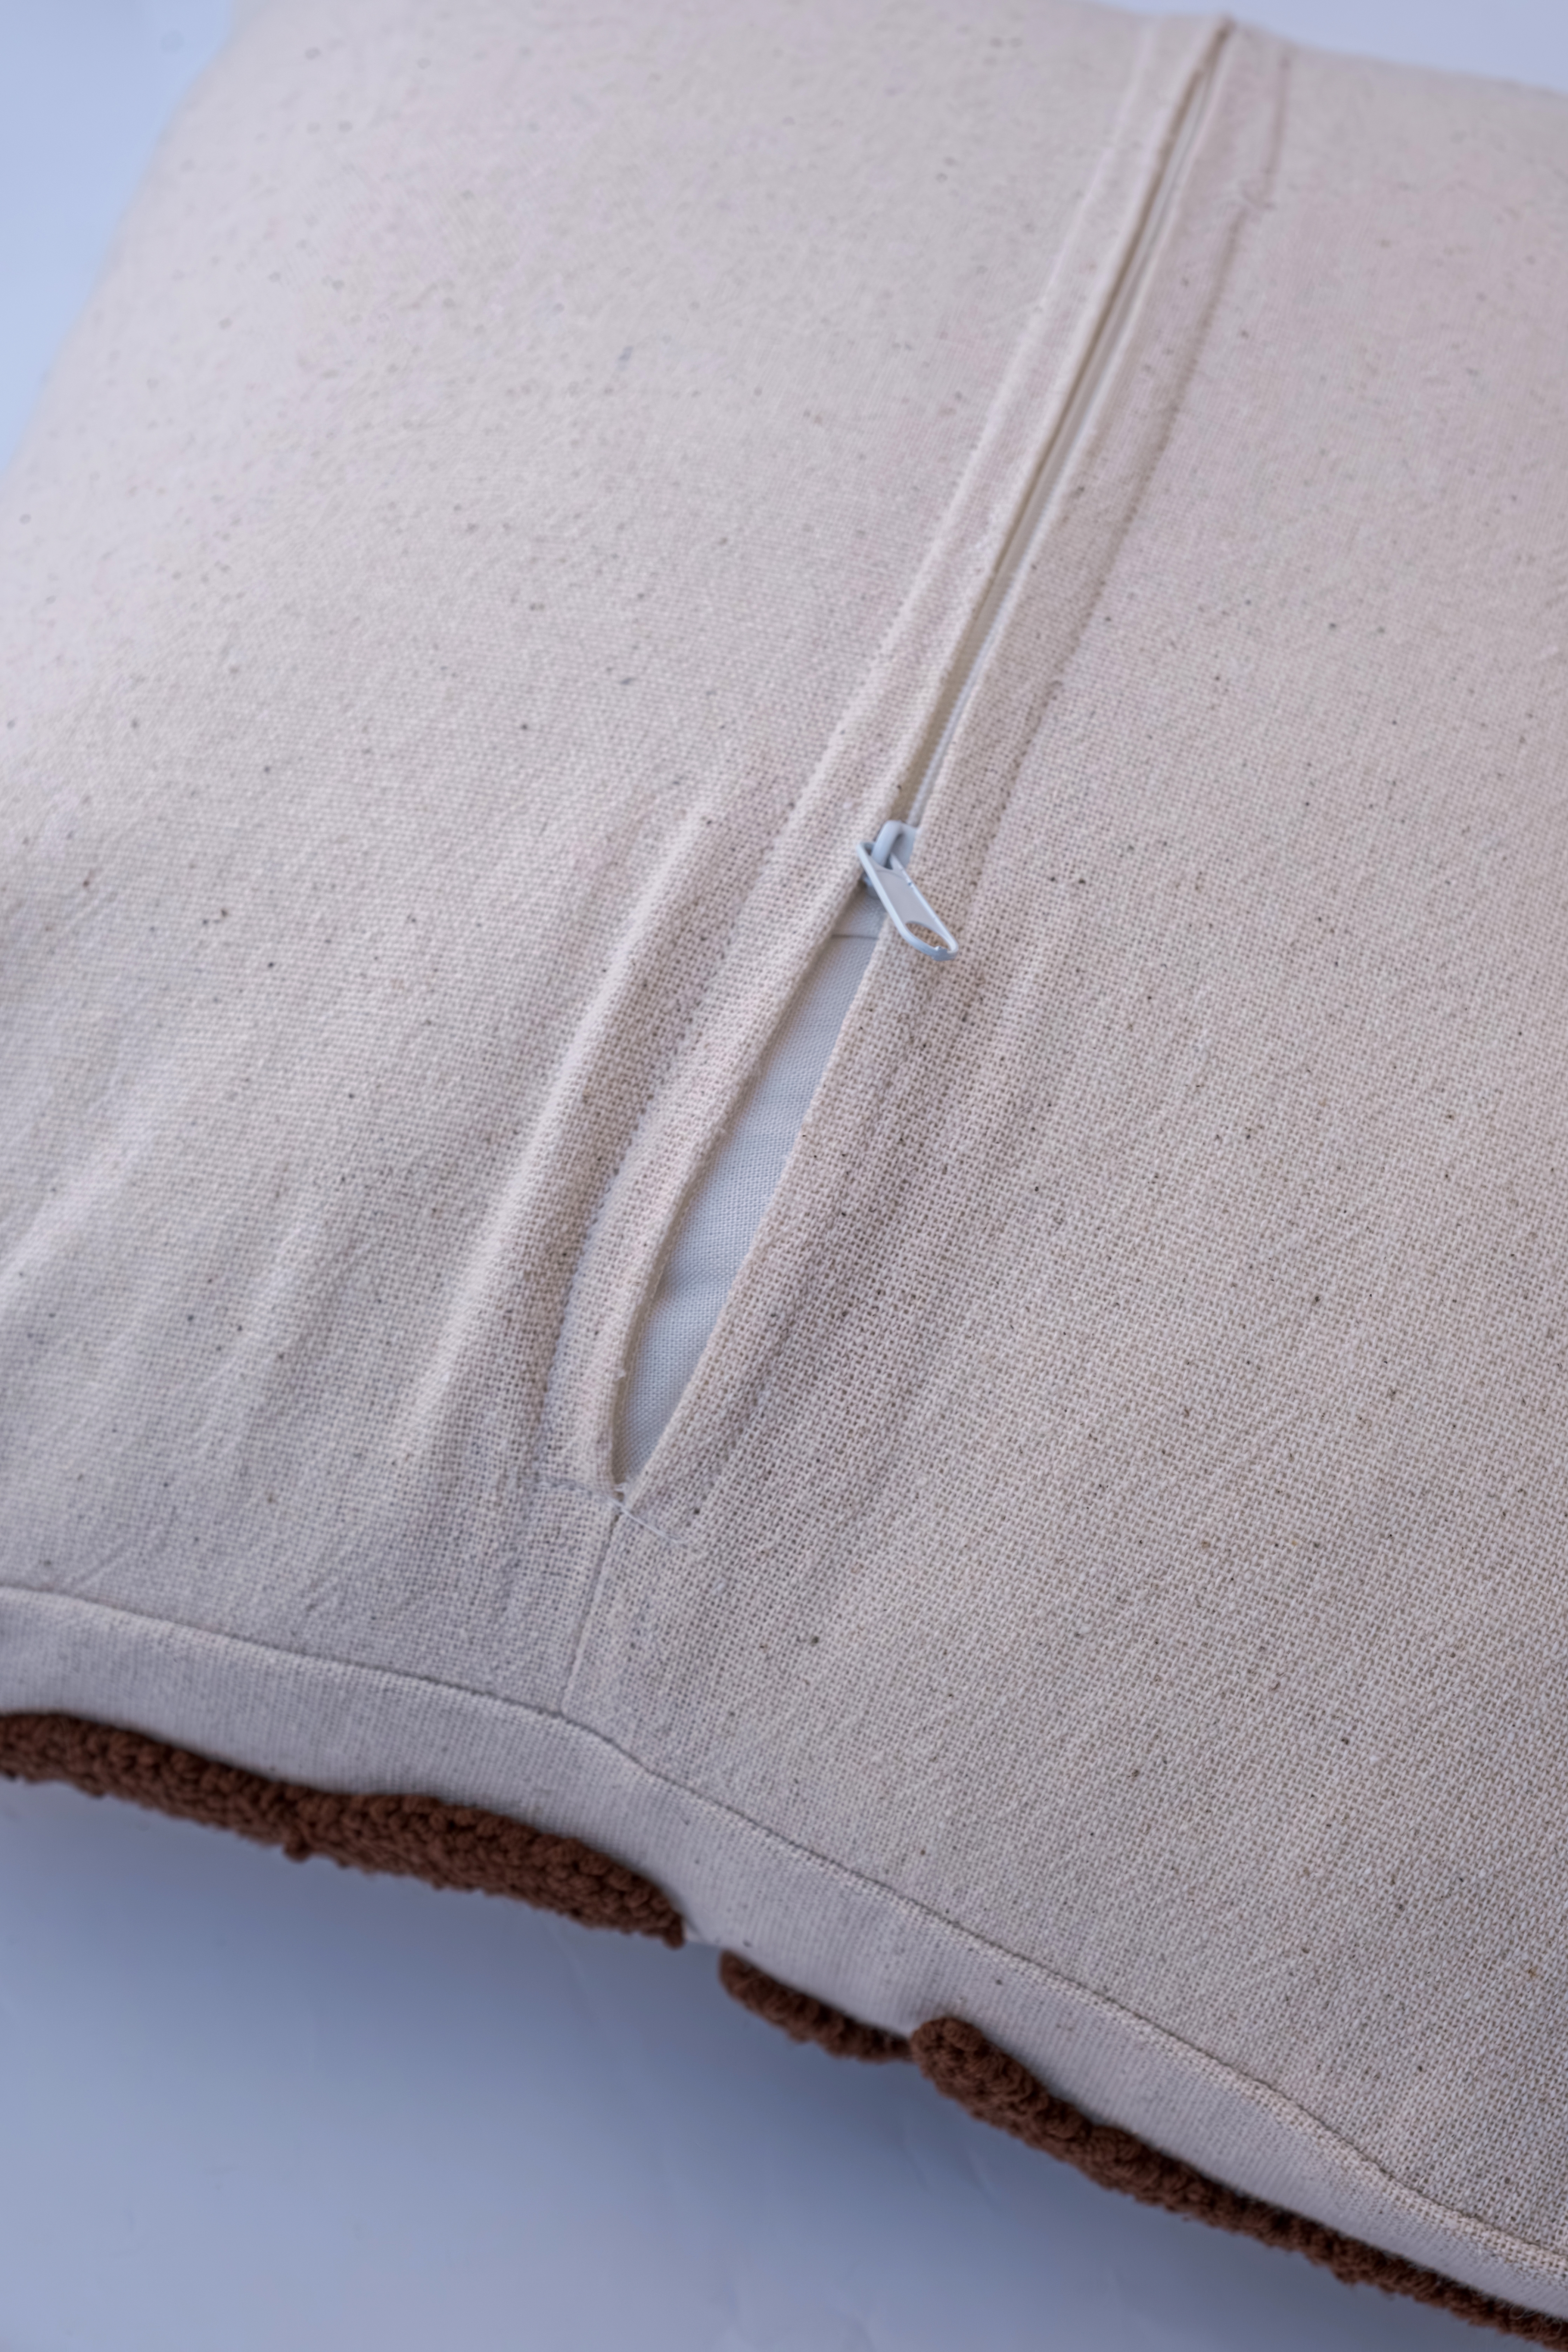 Slightly unzipped couch cushion | Source: Shutterstock